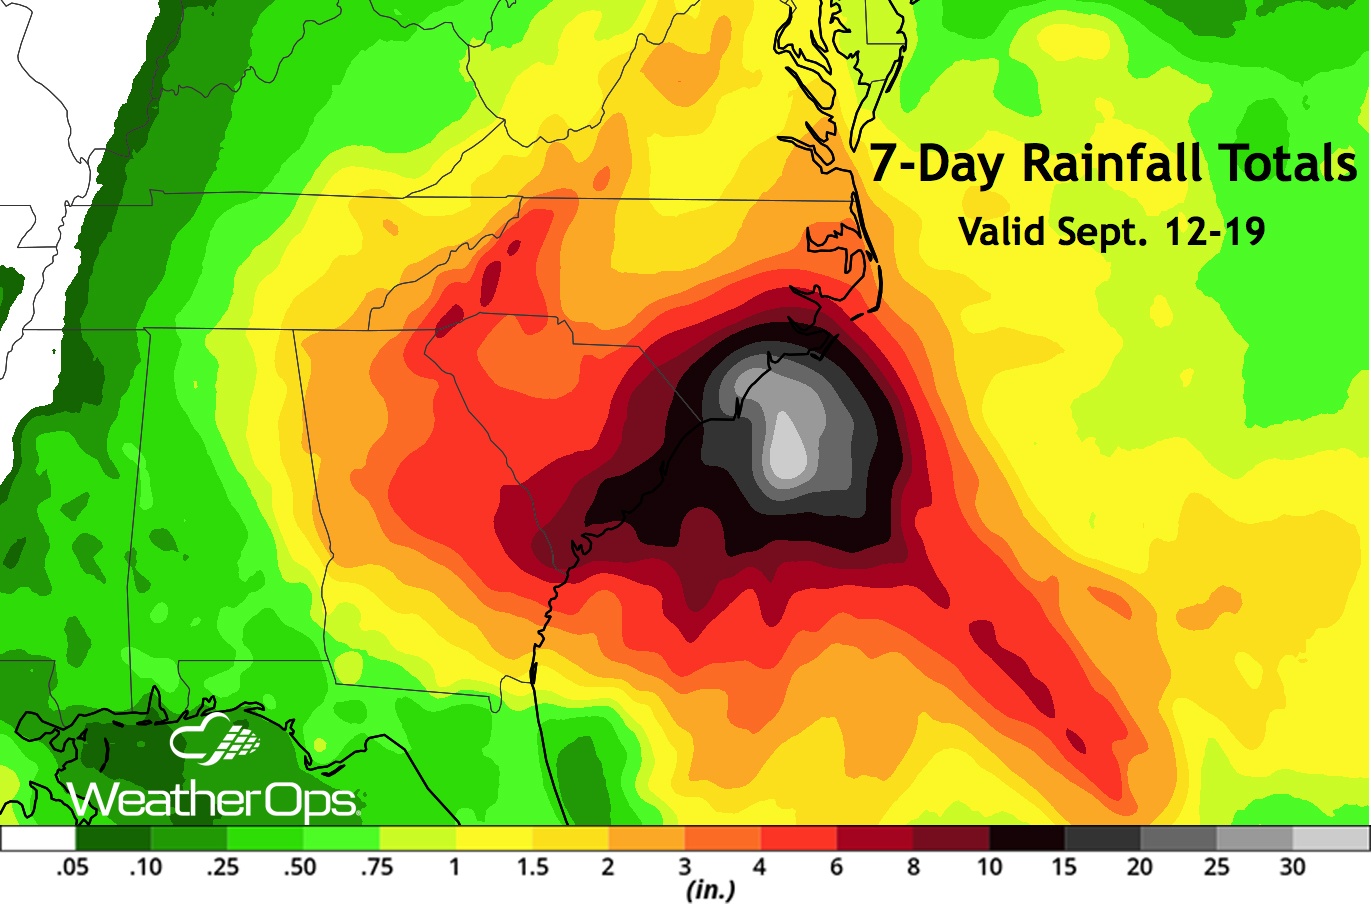 7-Day Rainfall Totals Due to Florence